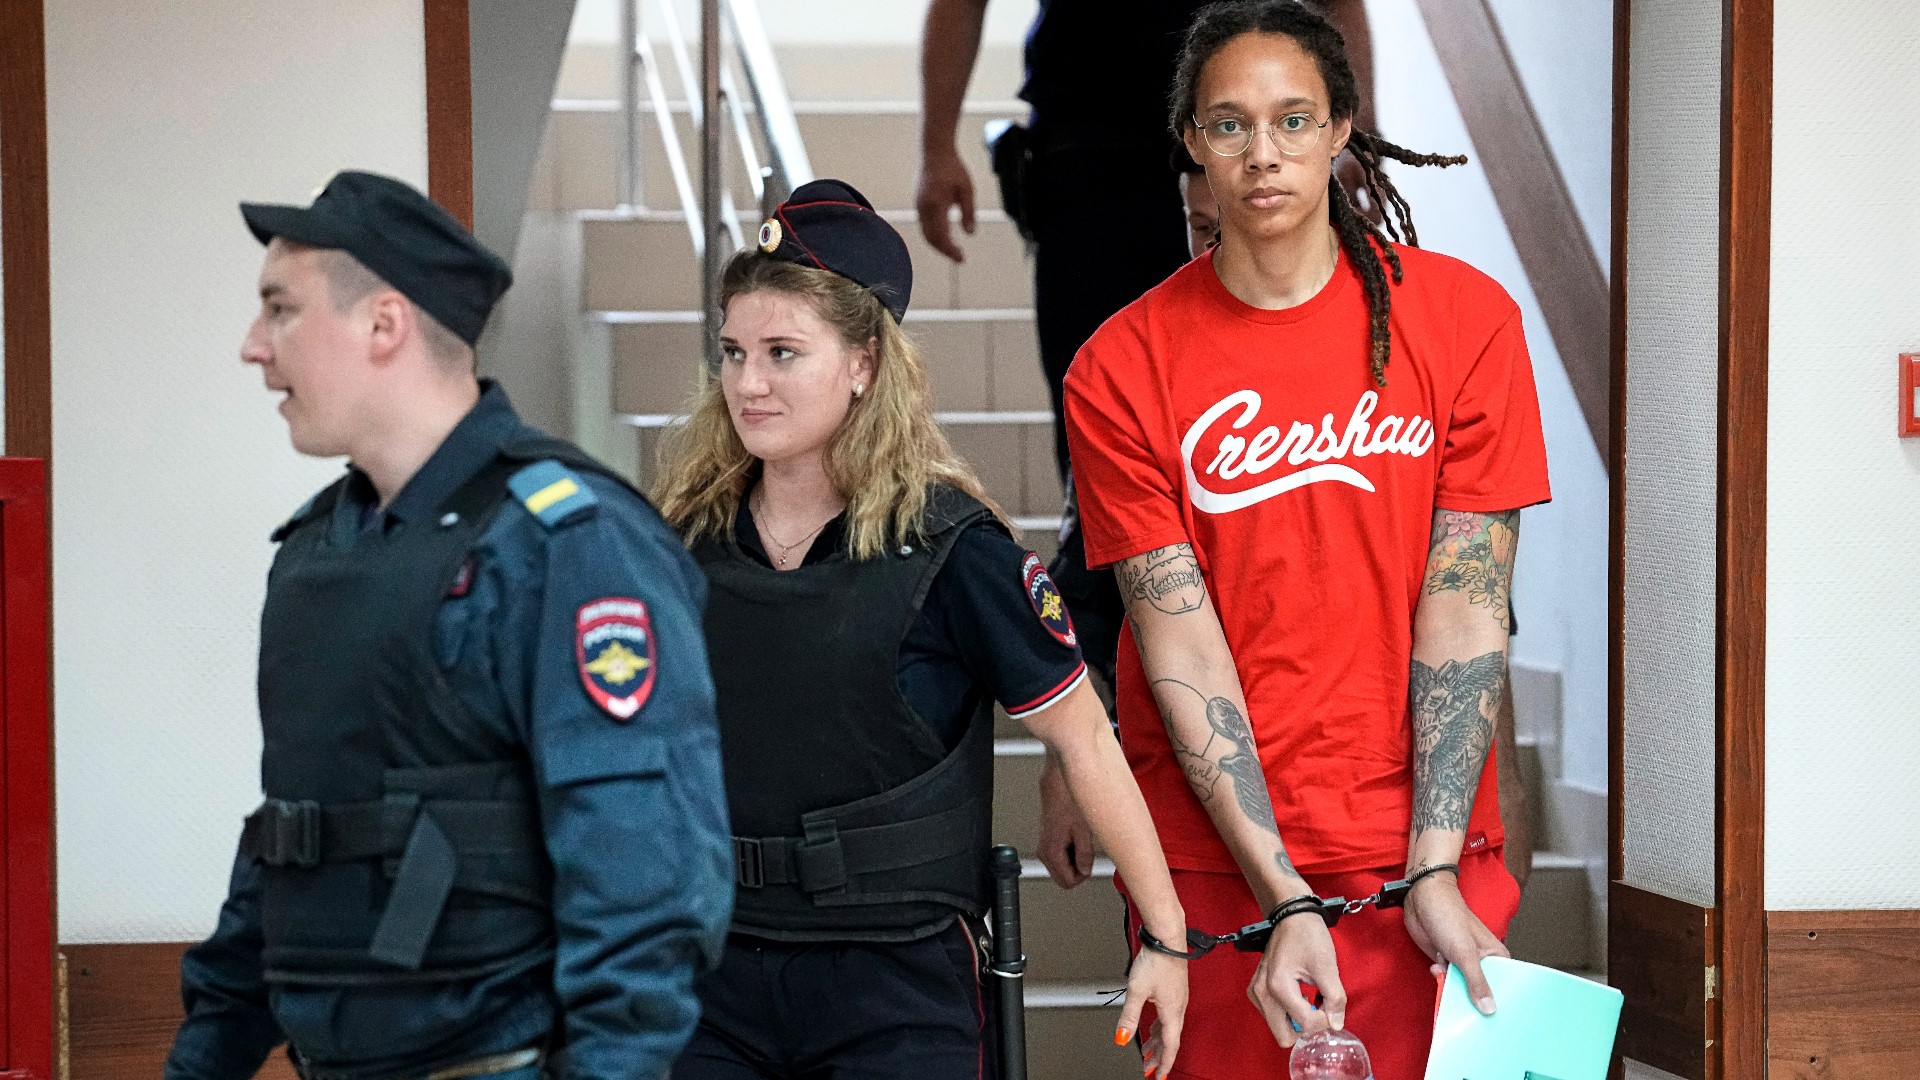 The WNBA star and Texas native pleaded guilty to drug charges last week. Vape canisters with cannabis oil were allegedly found in her luggage in February.